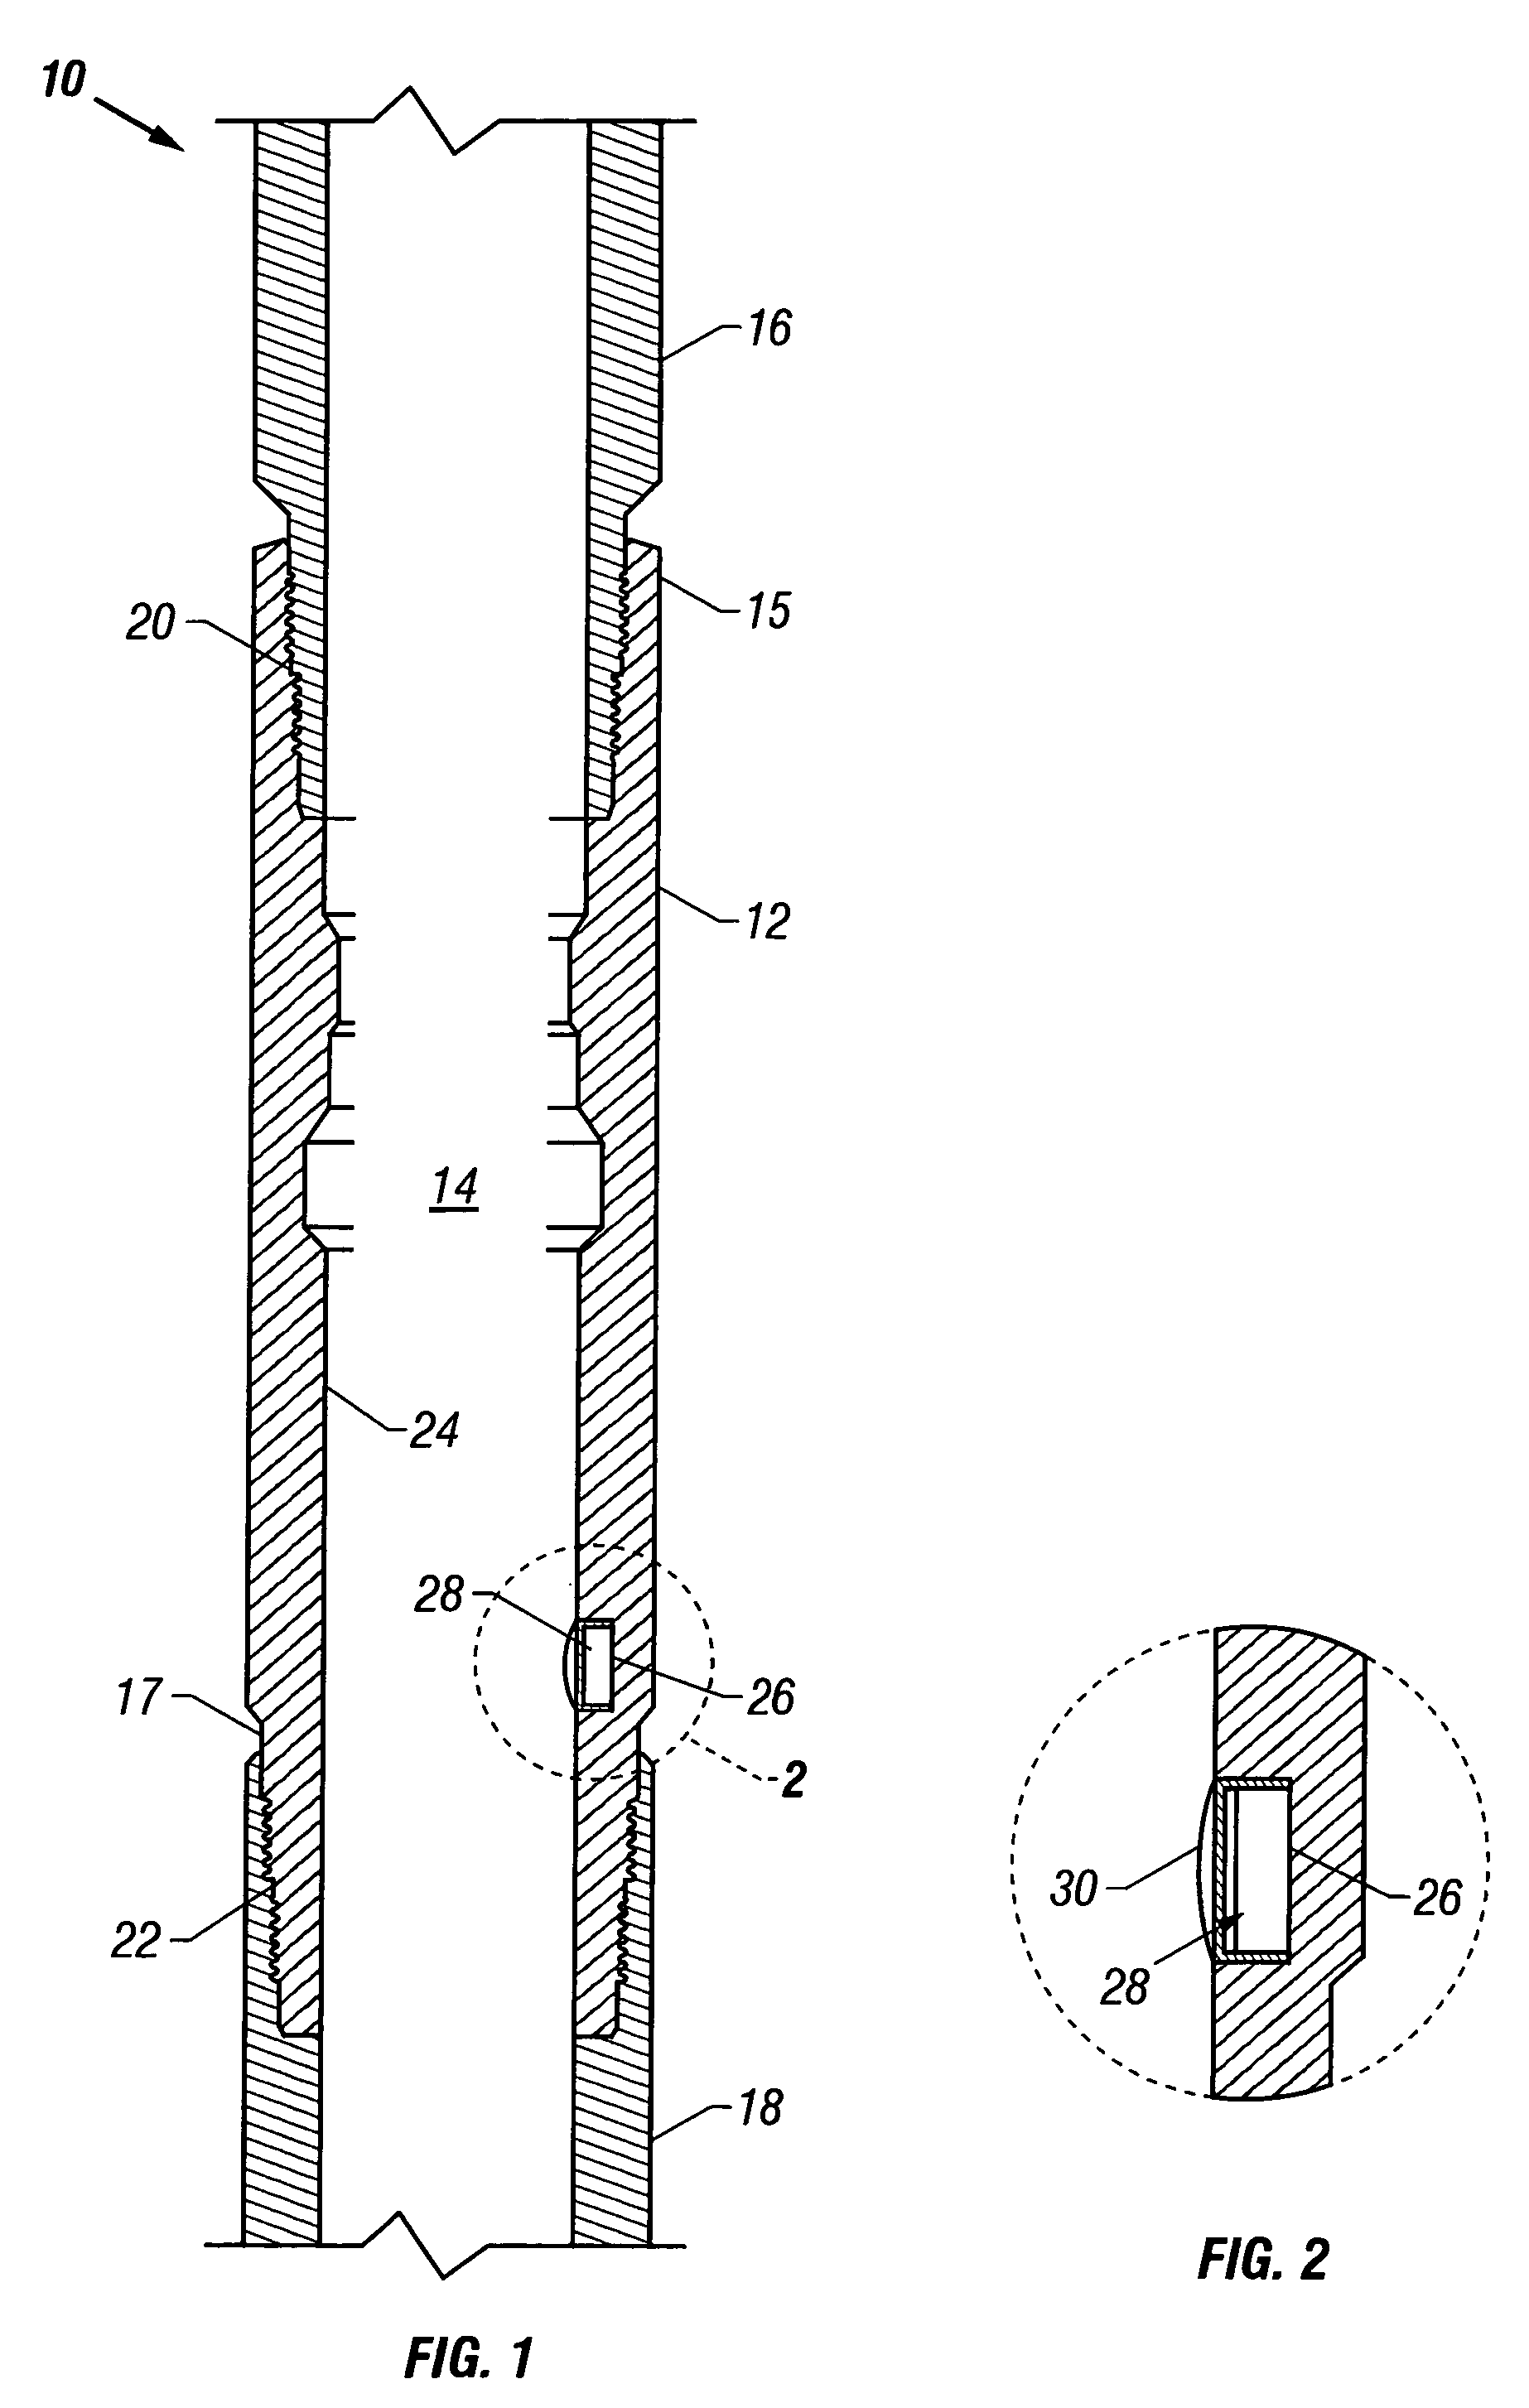 Apparatus and method for downhole well equipment and process management, identification, and actuation